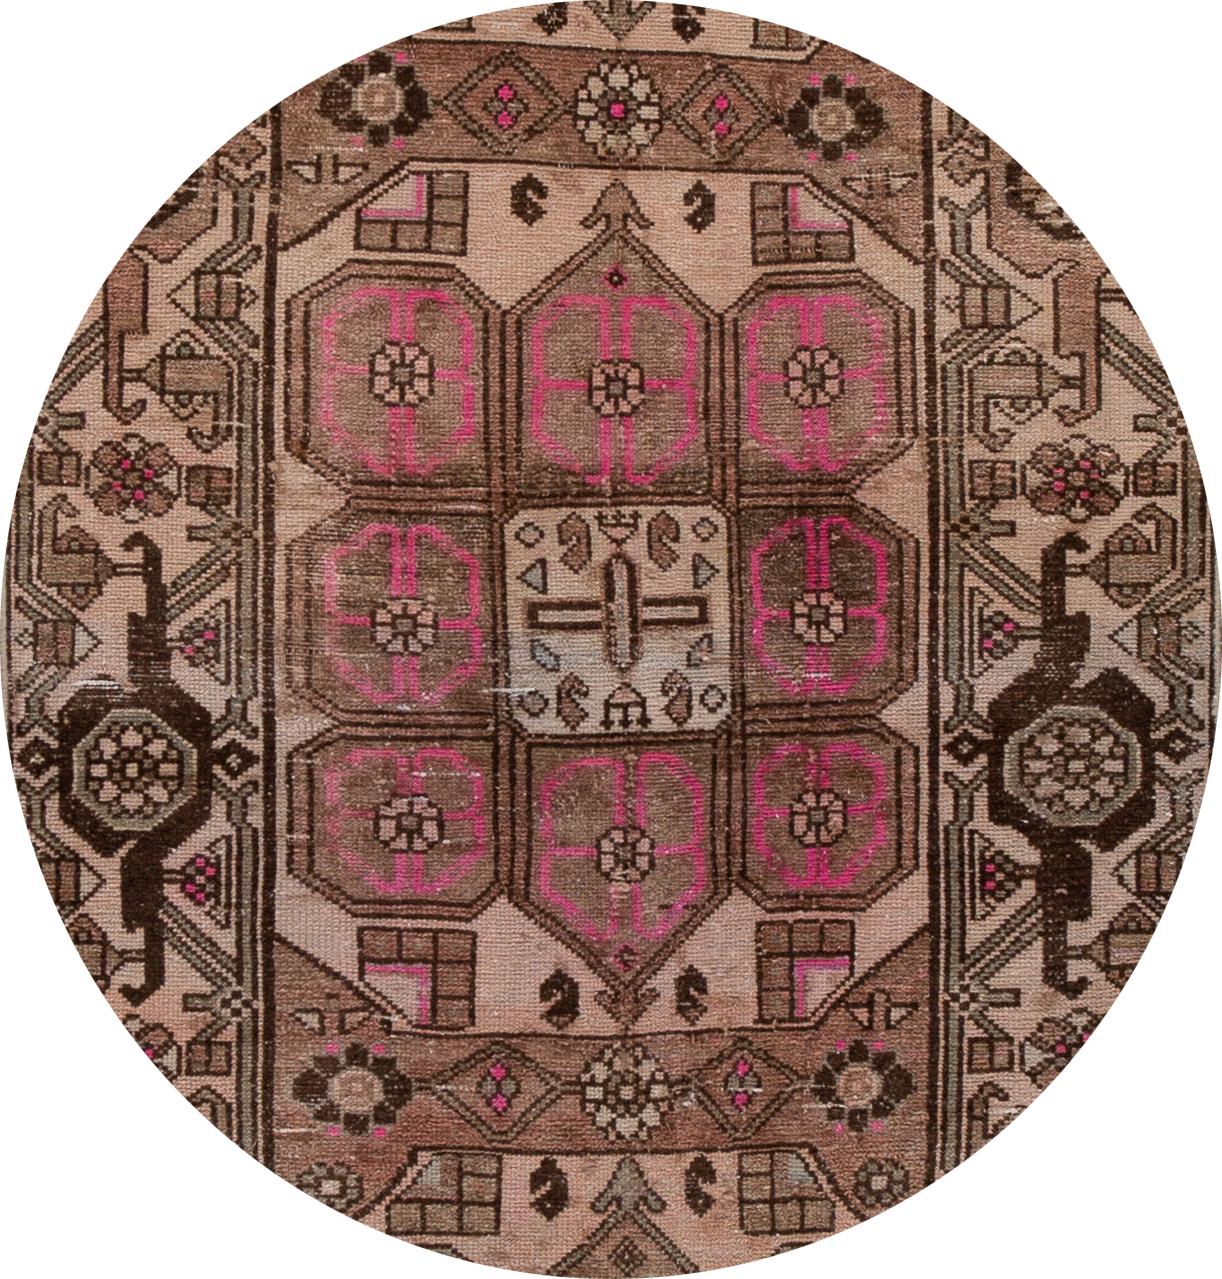 Beautiful vintage Malayer Persian runner rug with a brown field, pink and ivory accents with an all-over medallion design.

This rug measures 3'3